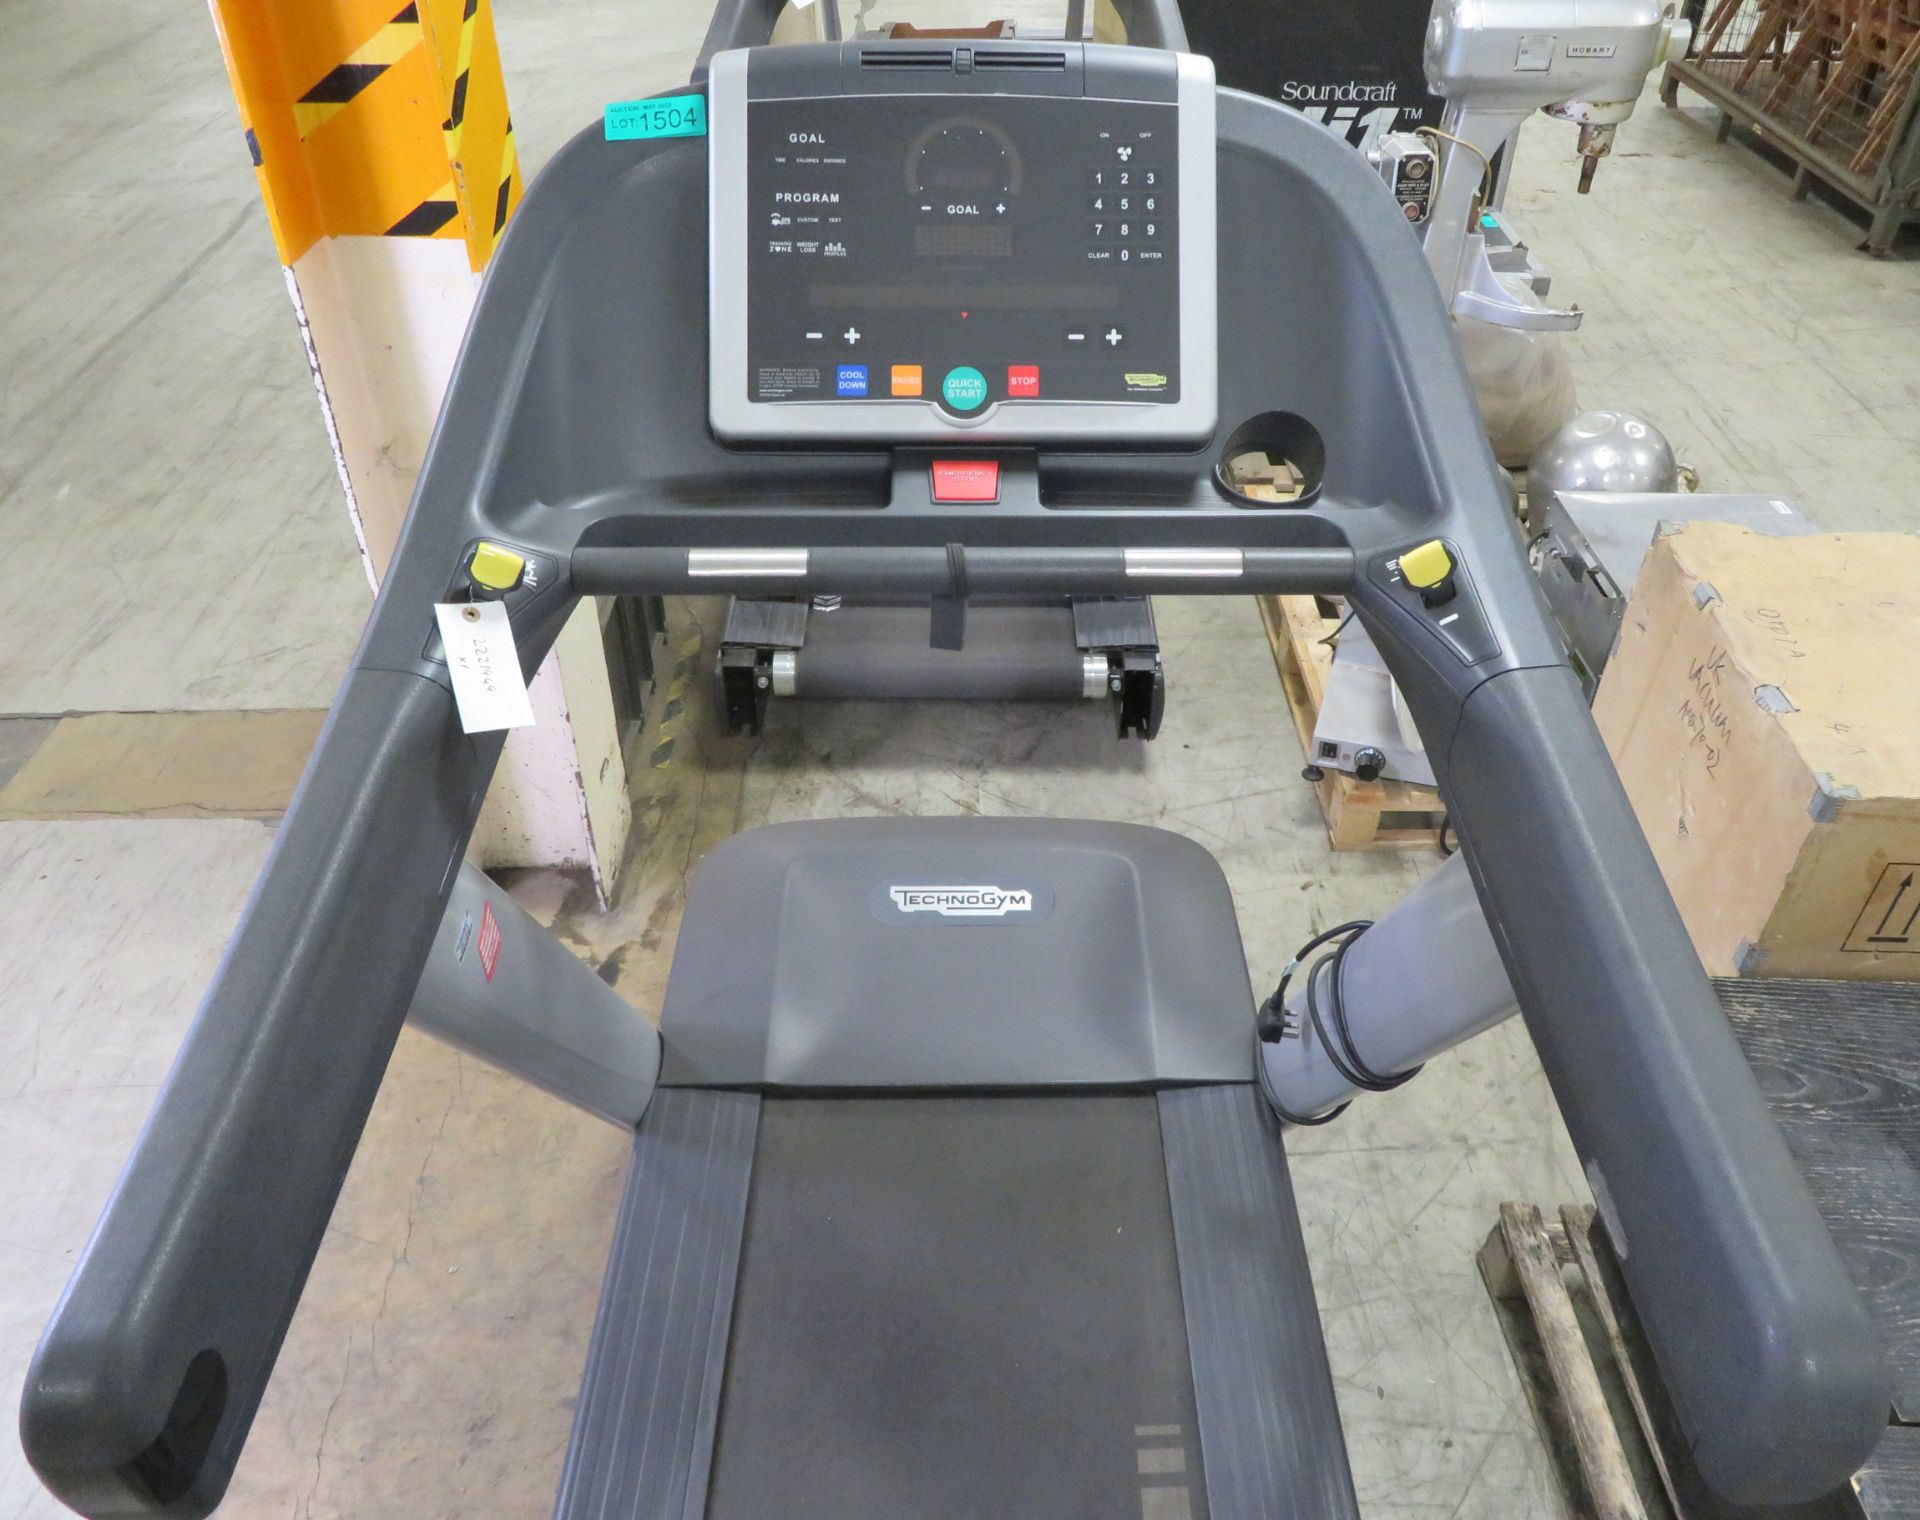 TechnoGym Excite Run Now 700 Treadmill With LCD Console - Image 3 of 4